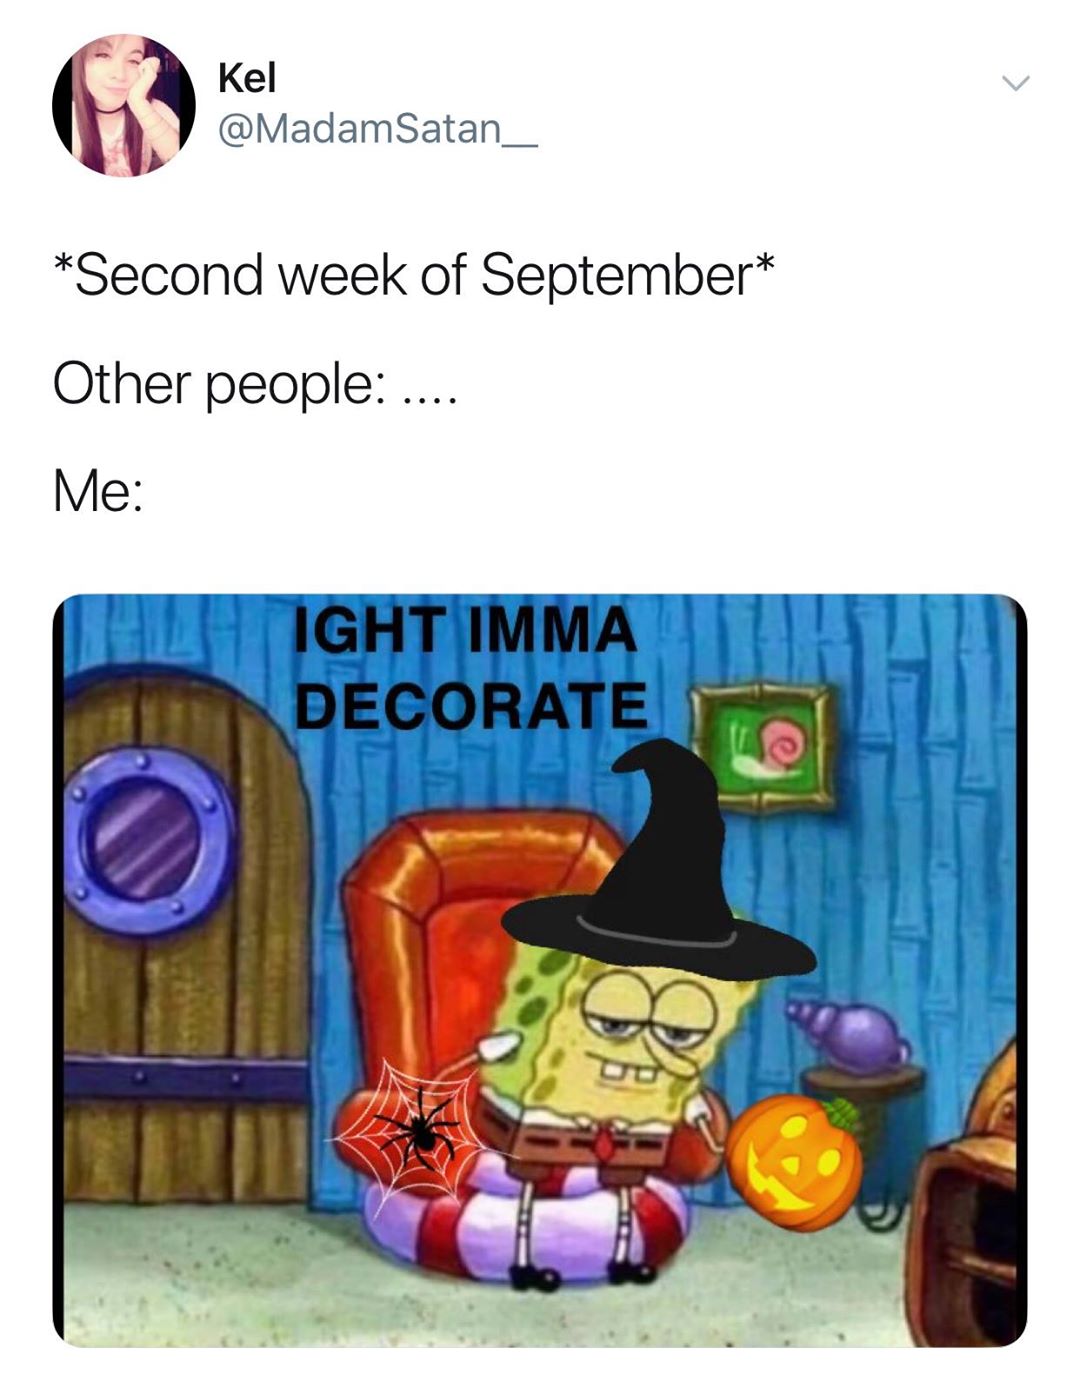 ight ima head out - serotonine meme - Kel Second week of September Other people .... Me Ight Imma Decorate